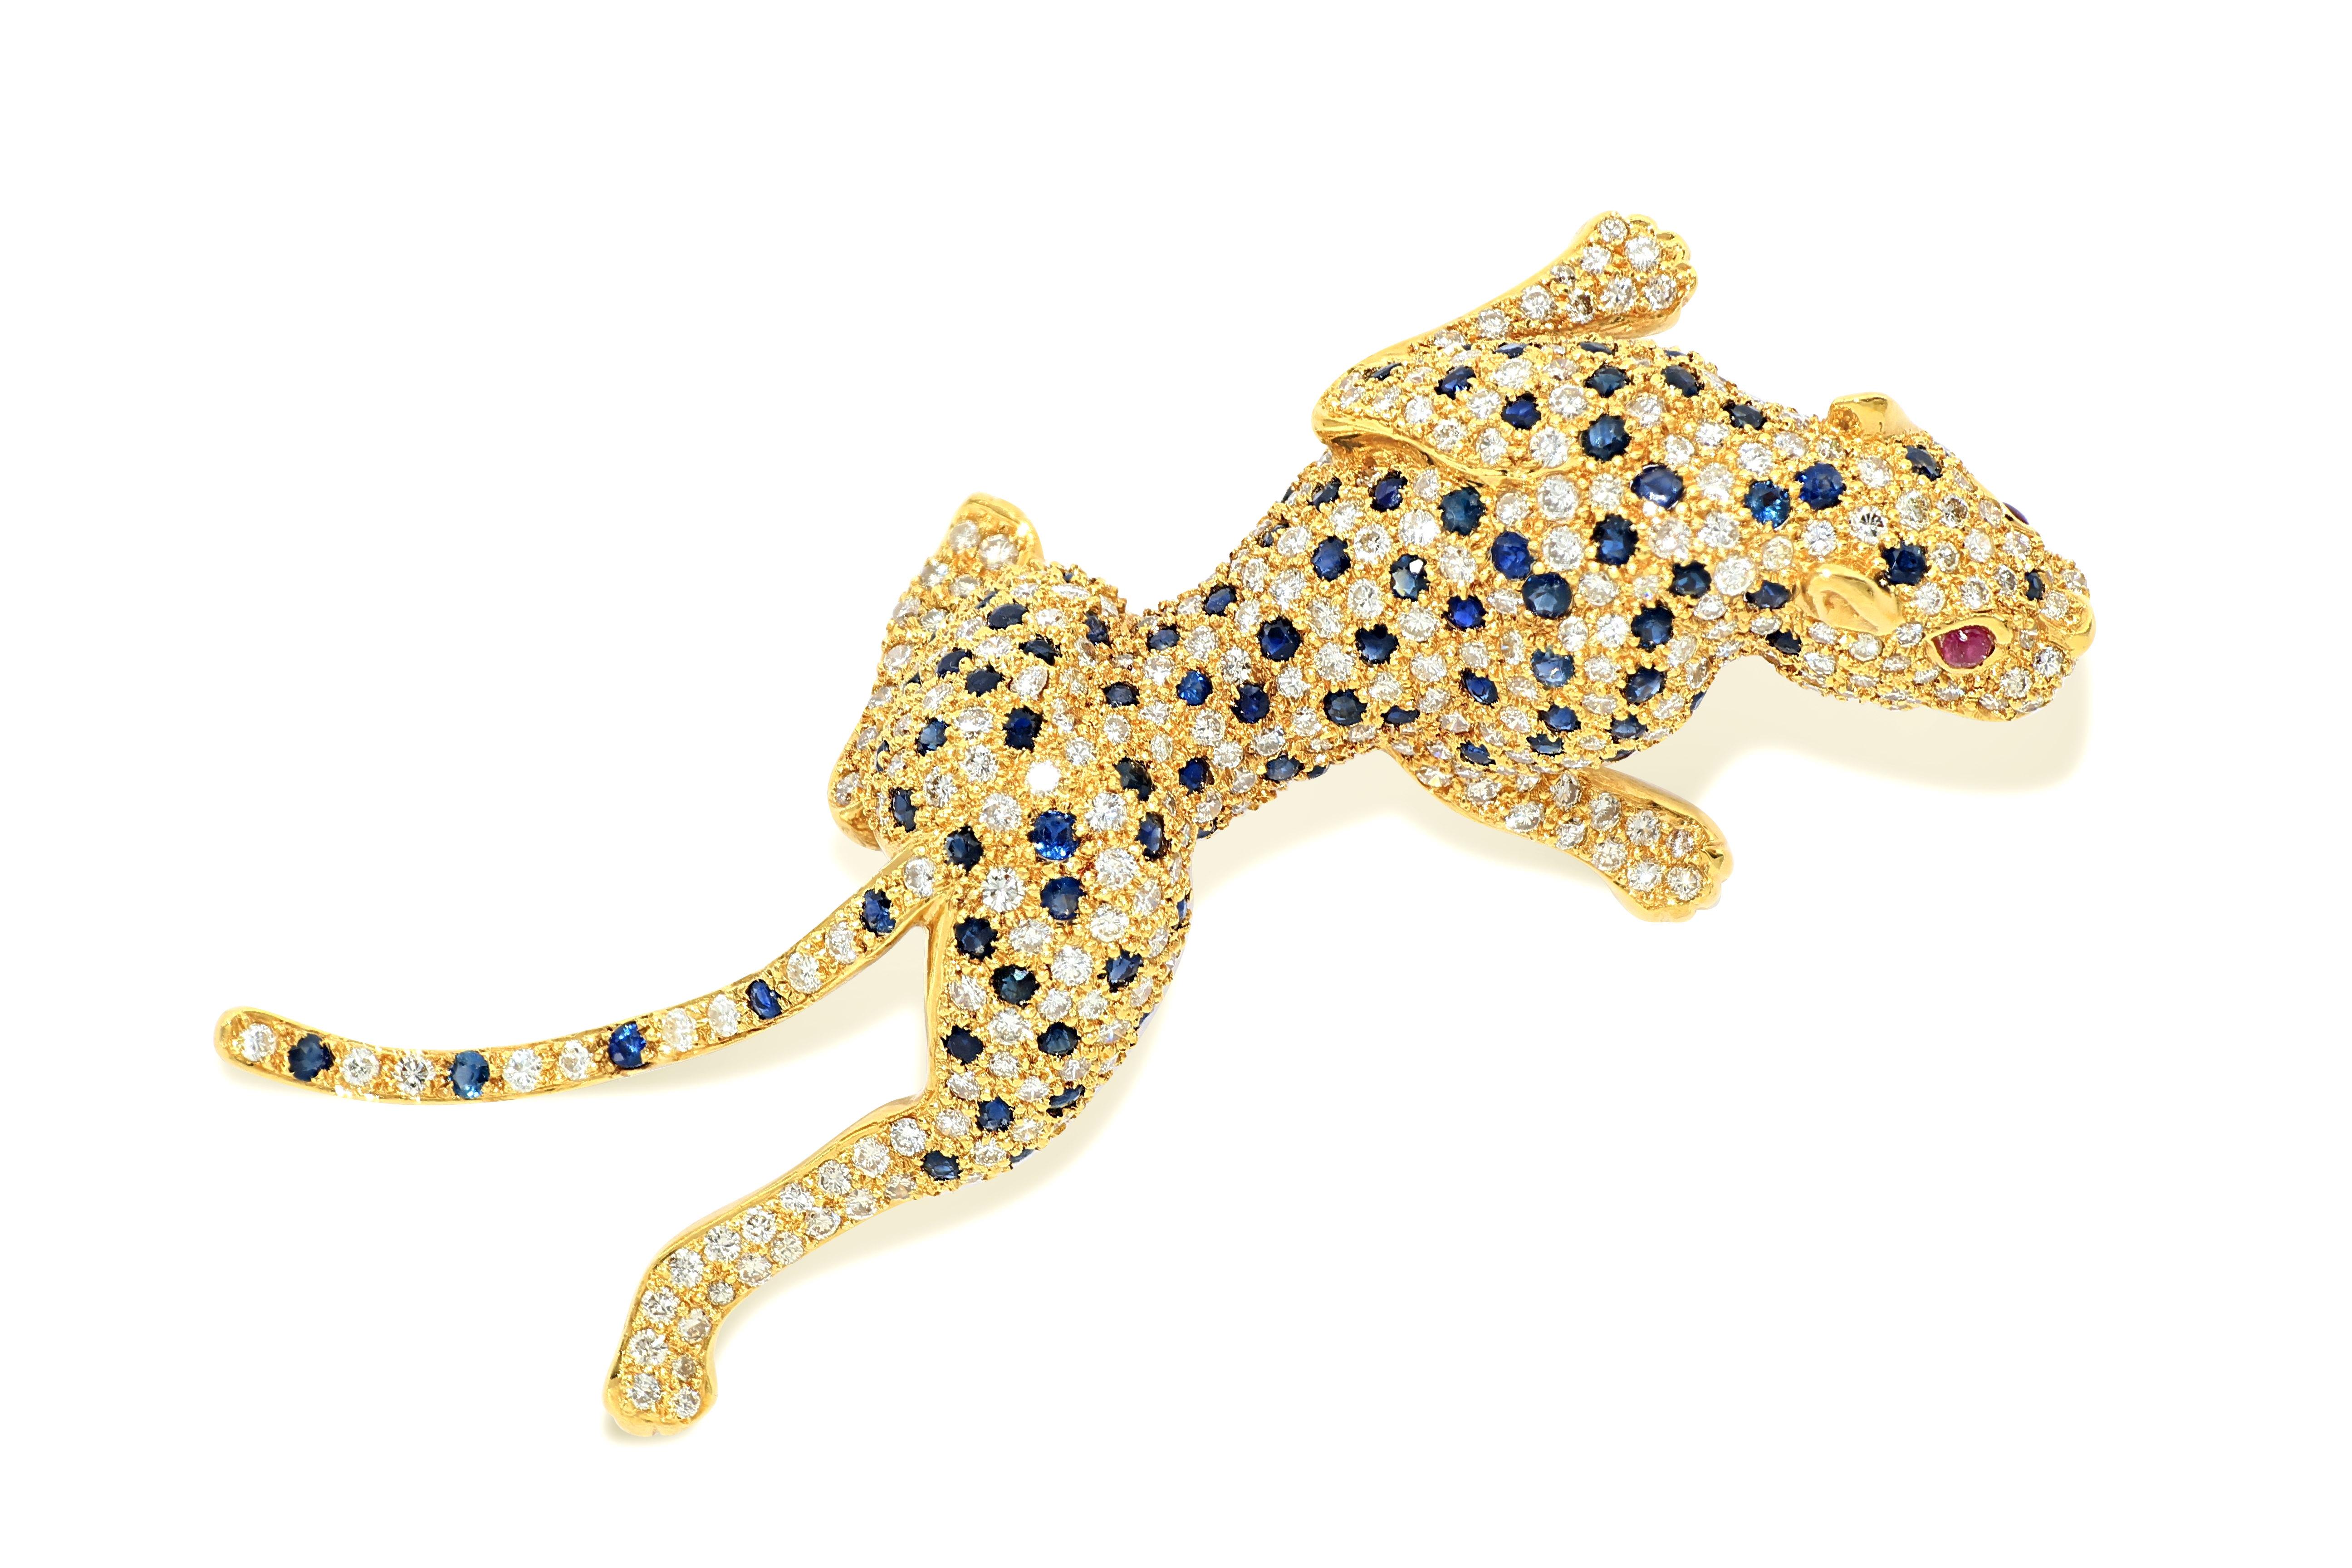 18K Gold Diamond Panther Brooch with Sapphires and Rubies  In New Condition For Sale In Macau, MO